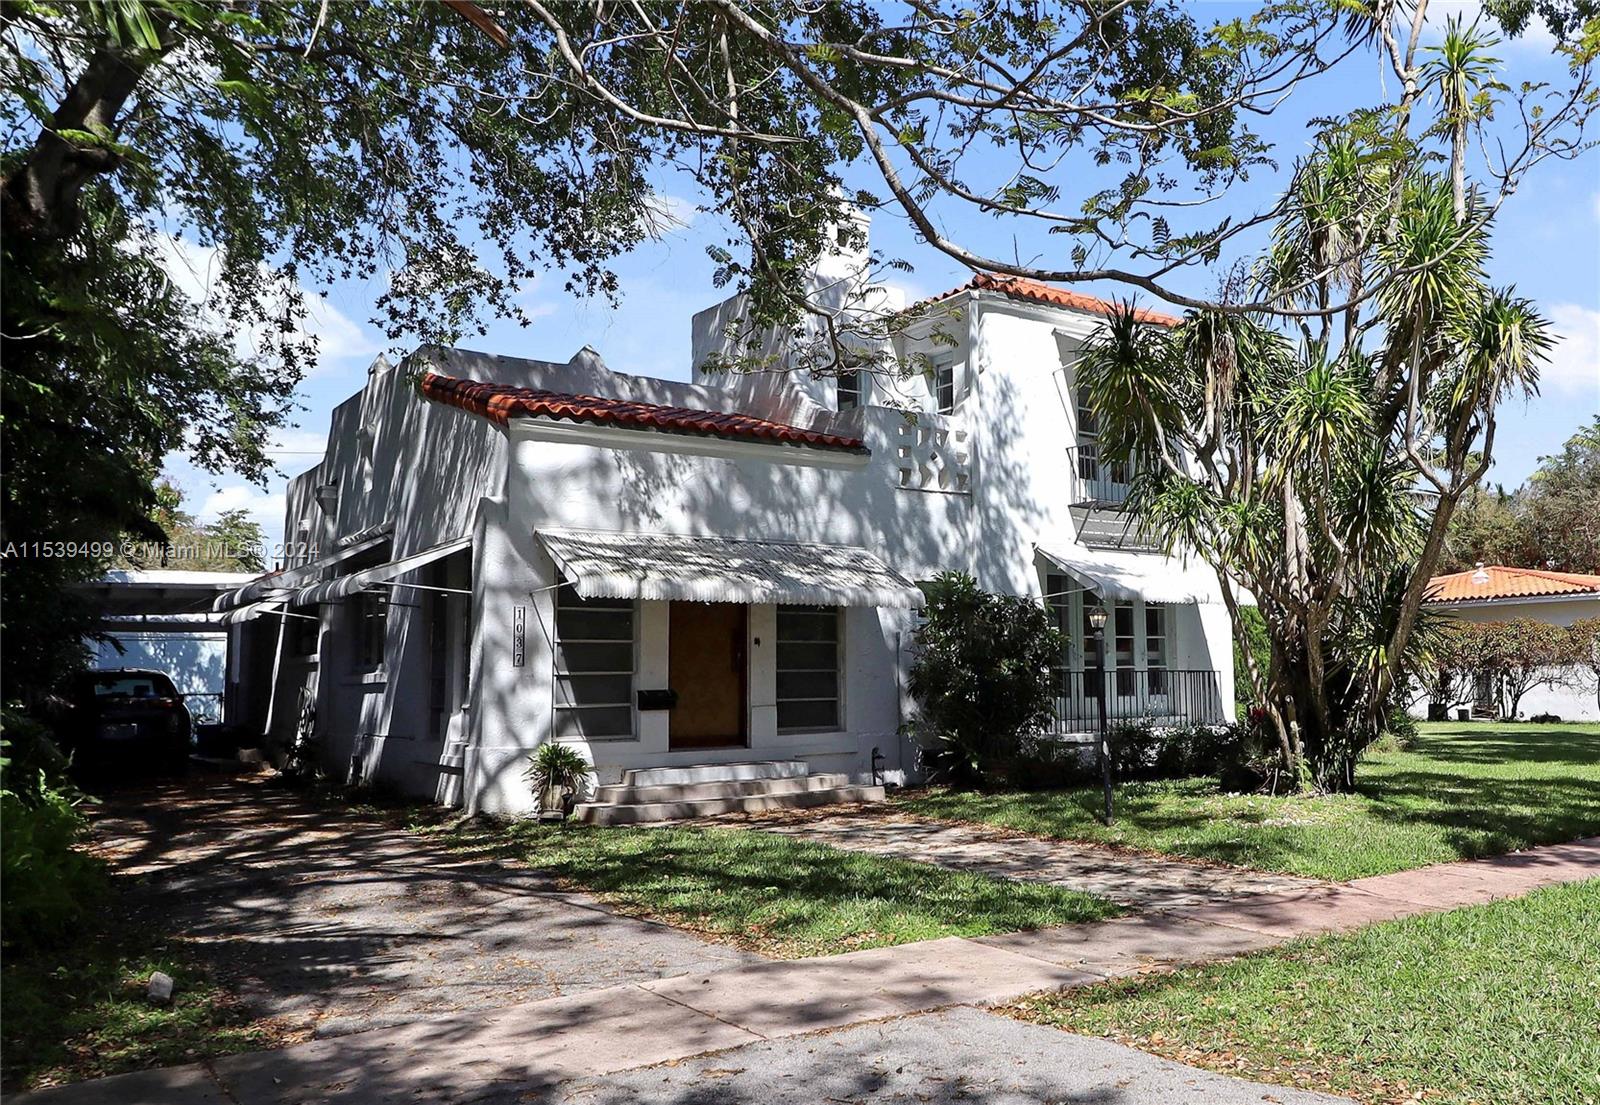 House for Sale in Coral Gables, FL